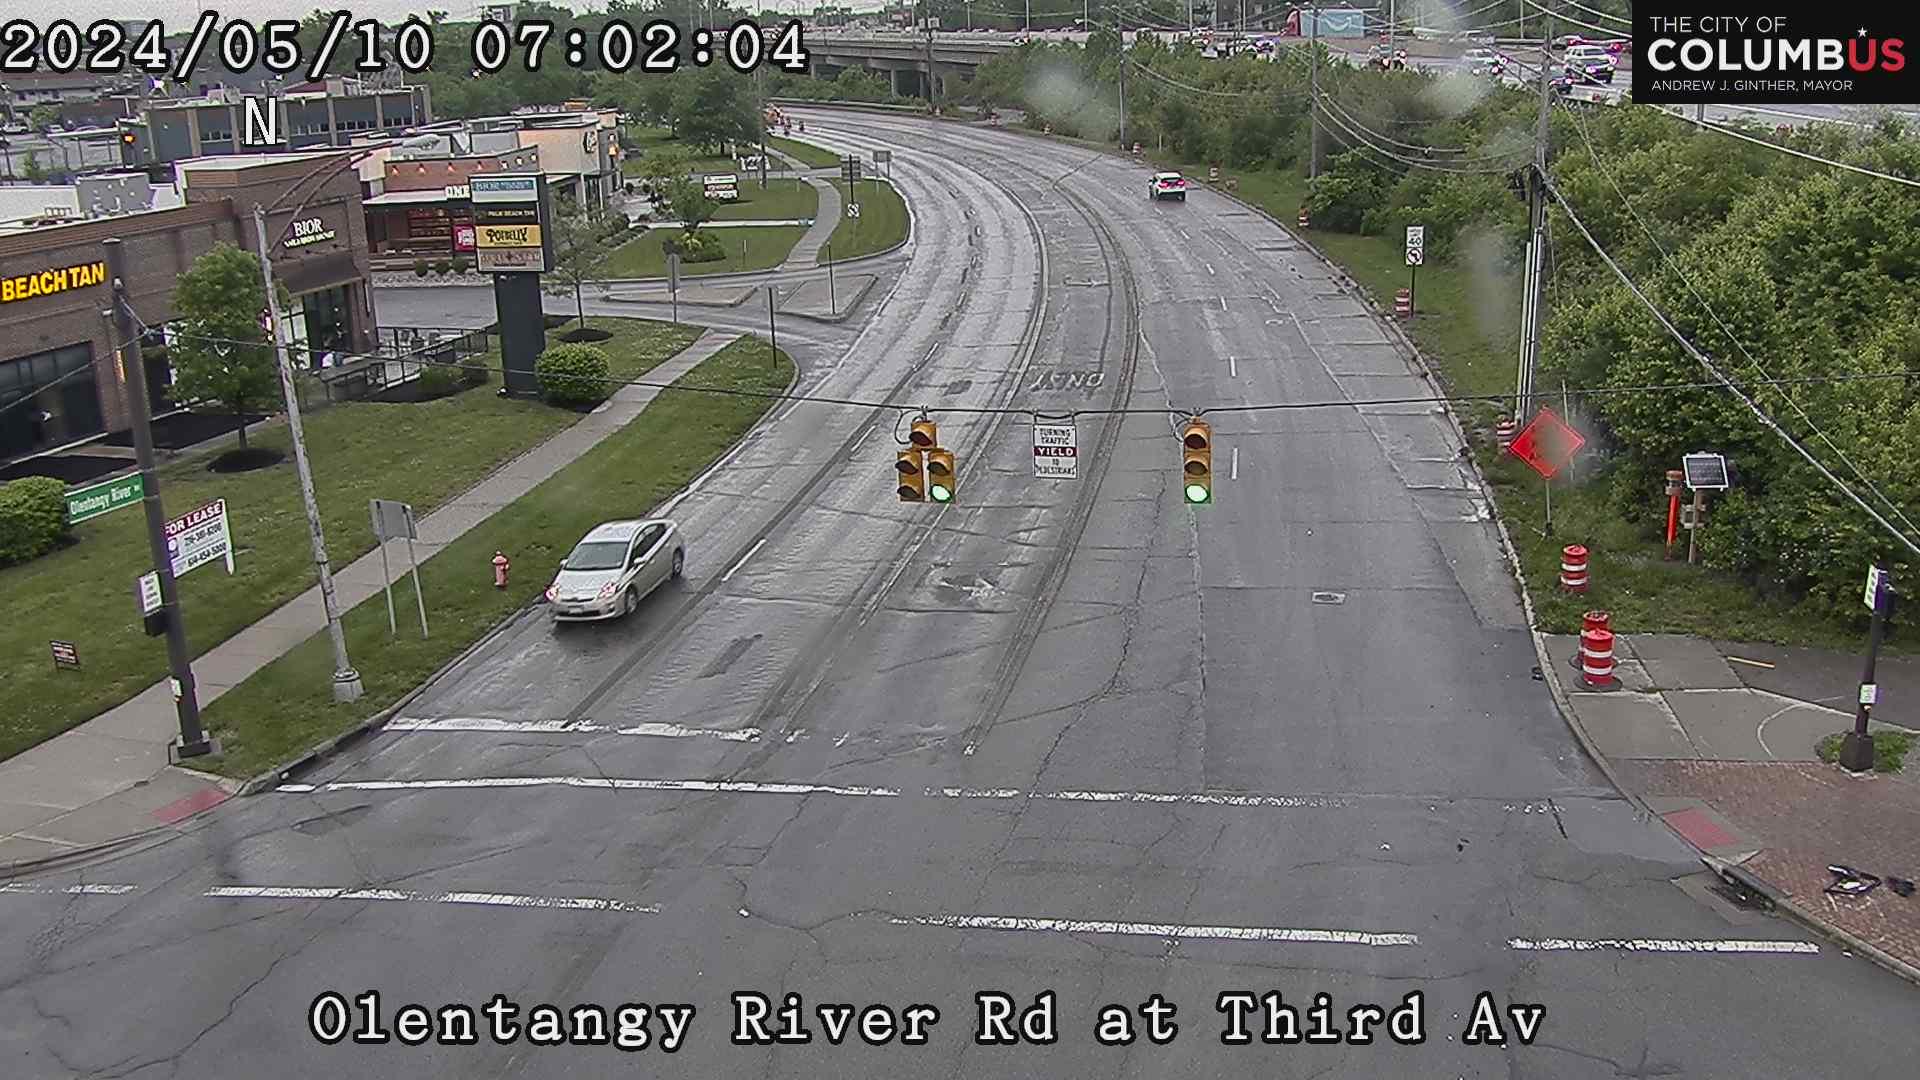 Harrison West: City of Columbus) Olentangy River Rd at Third Ave Traffic Camera